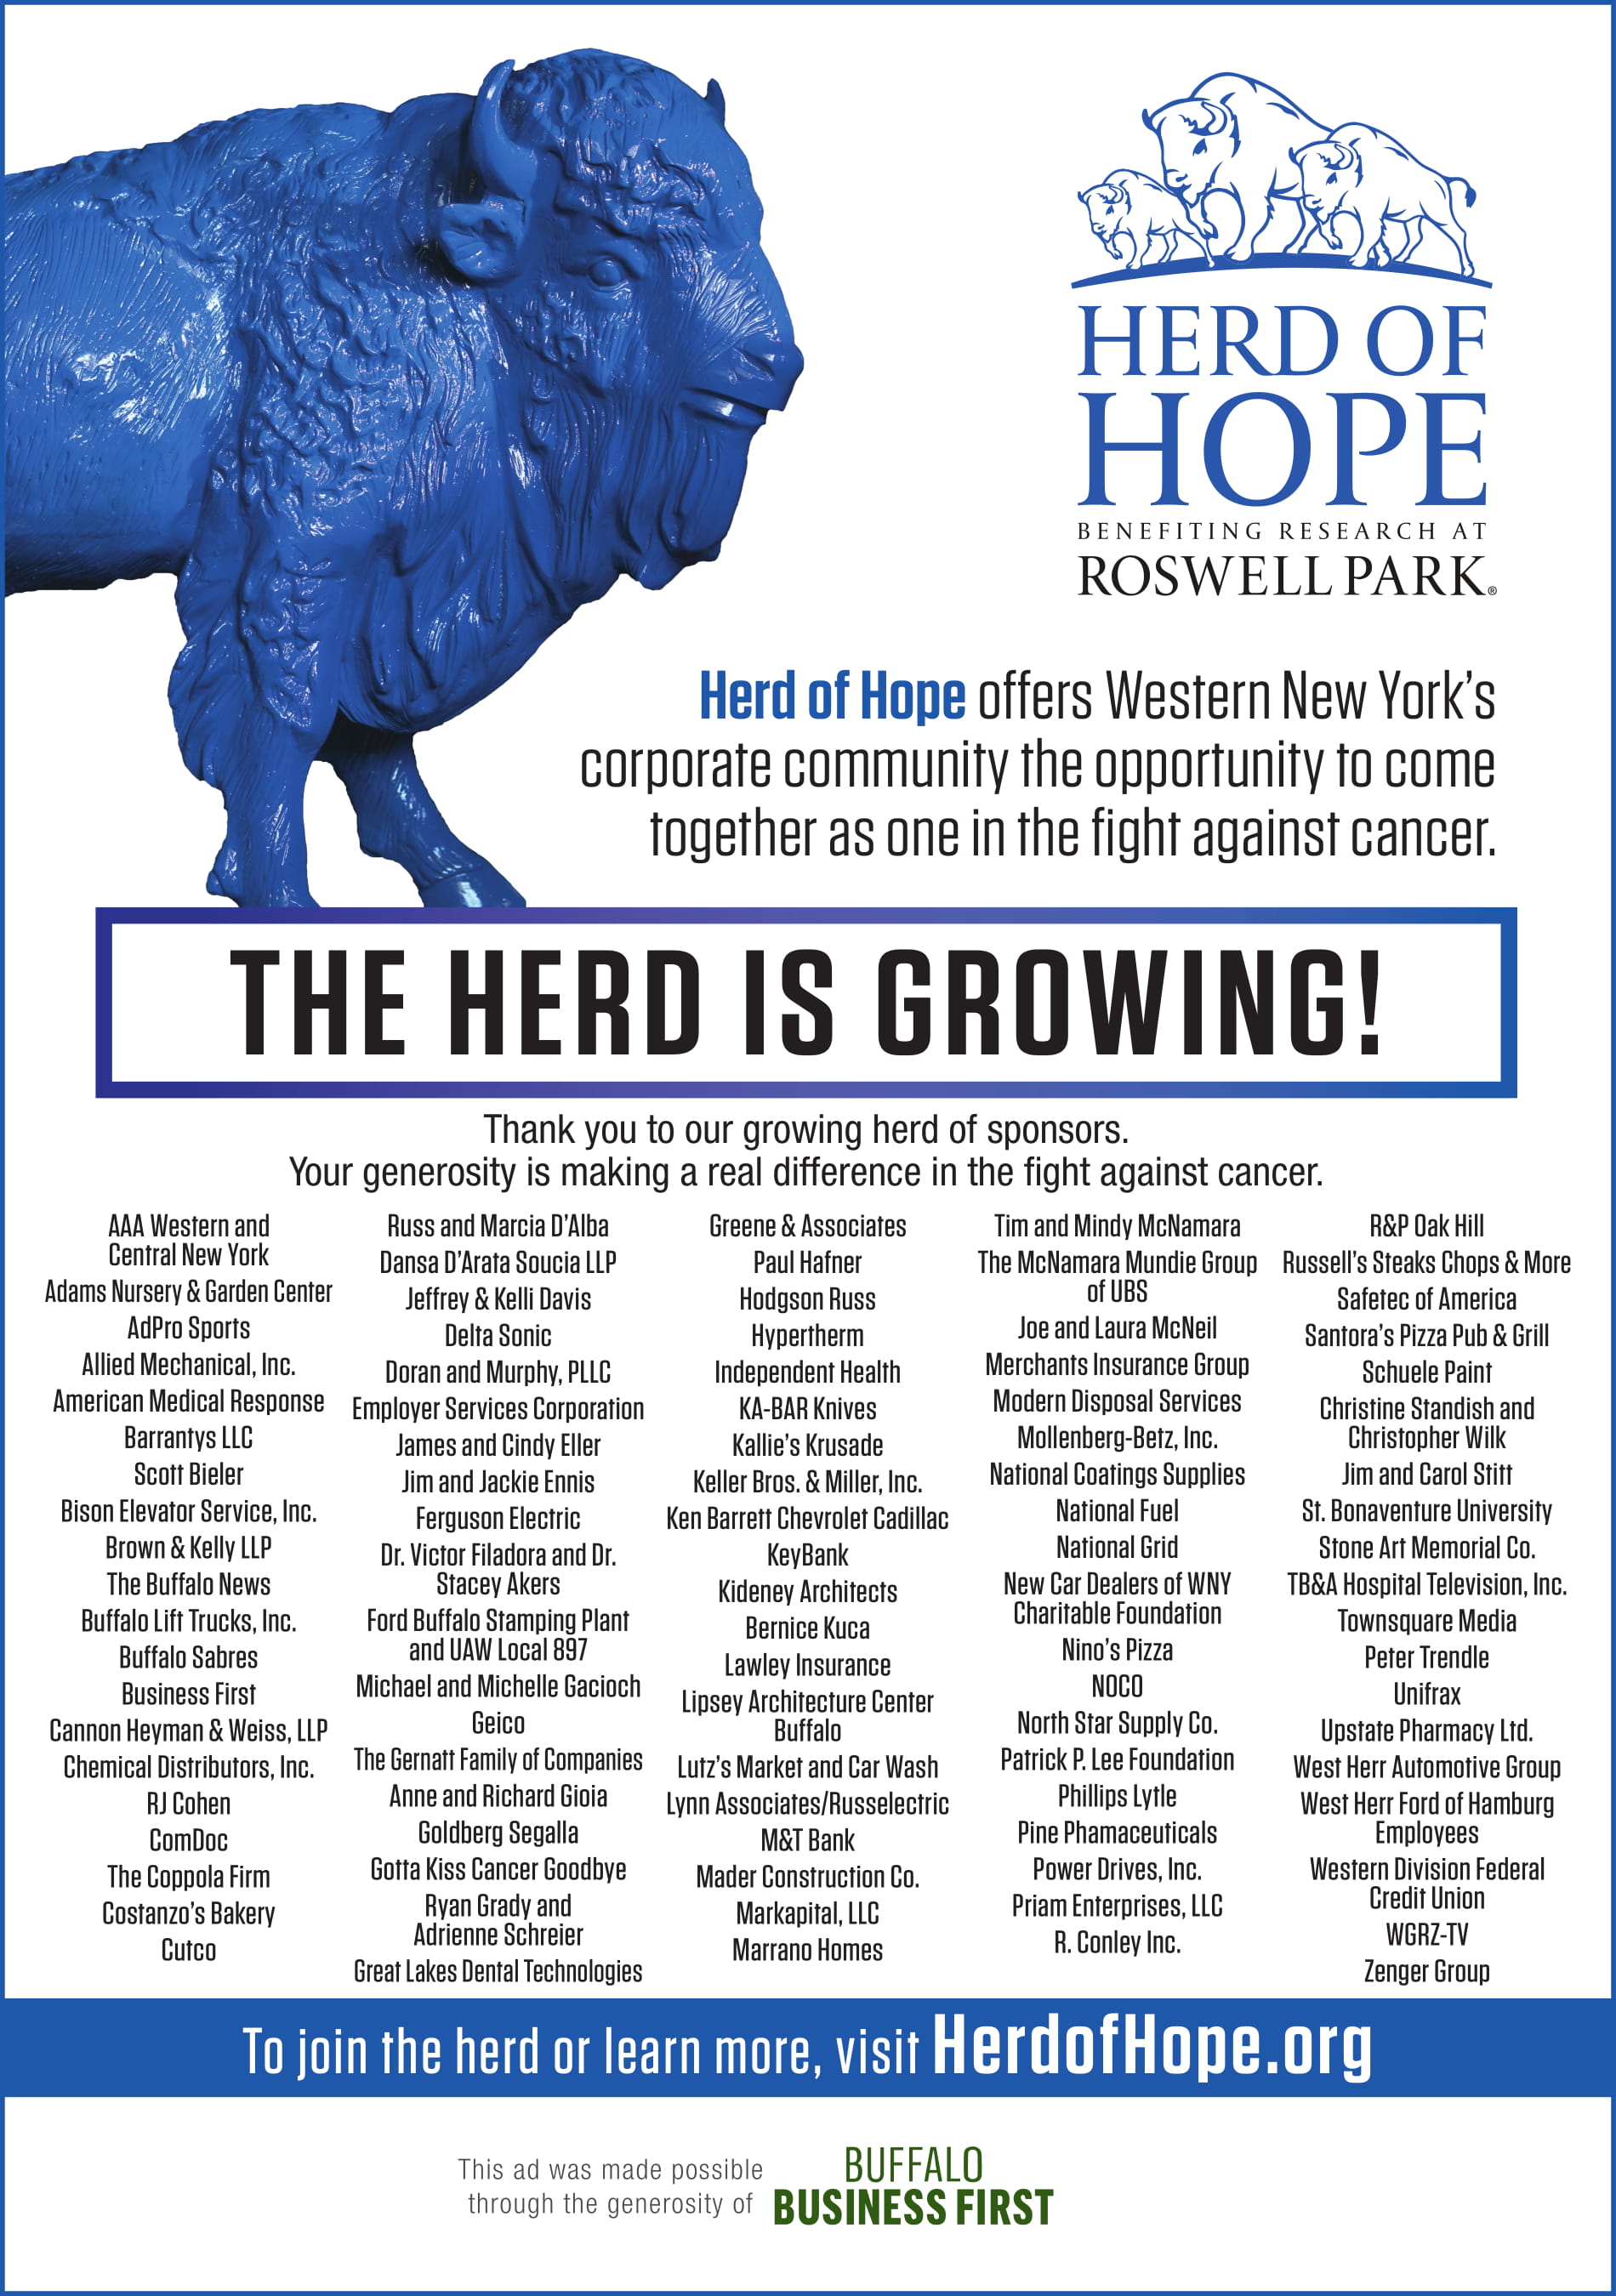 PROUD TO BE PART OF THE GROWING HERD OF HOPE